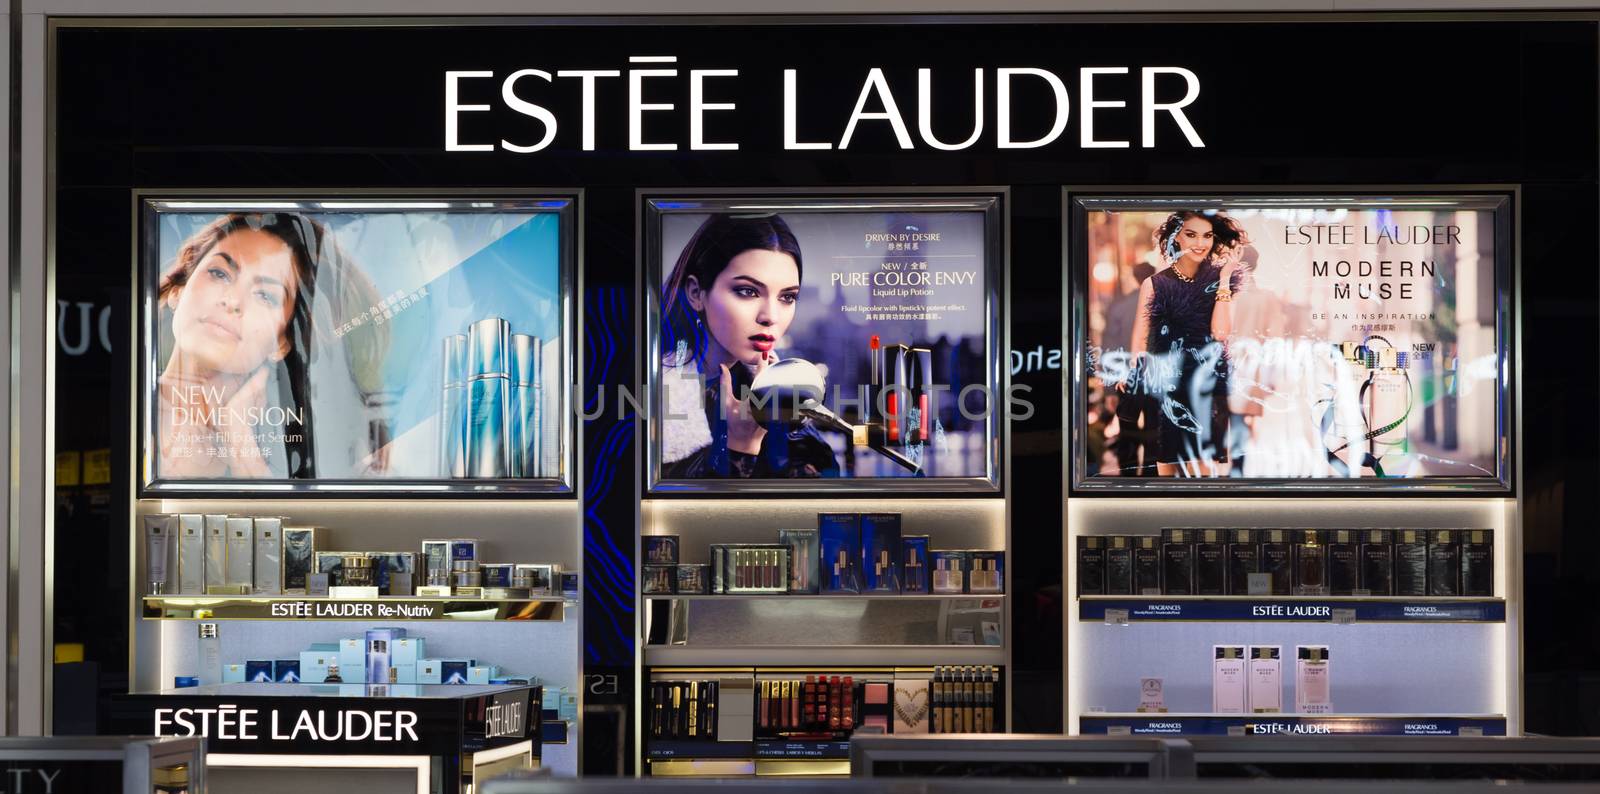 LOS ANGELES, CA/USA - AUGUST 4, 2015: Estee Lauder store display. Estee Lauder is an American manufacturer and marketer of high-end skincare, makeup, fragrance and hair care products.